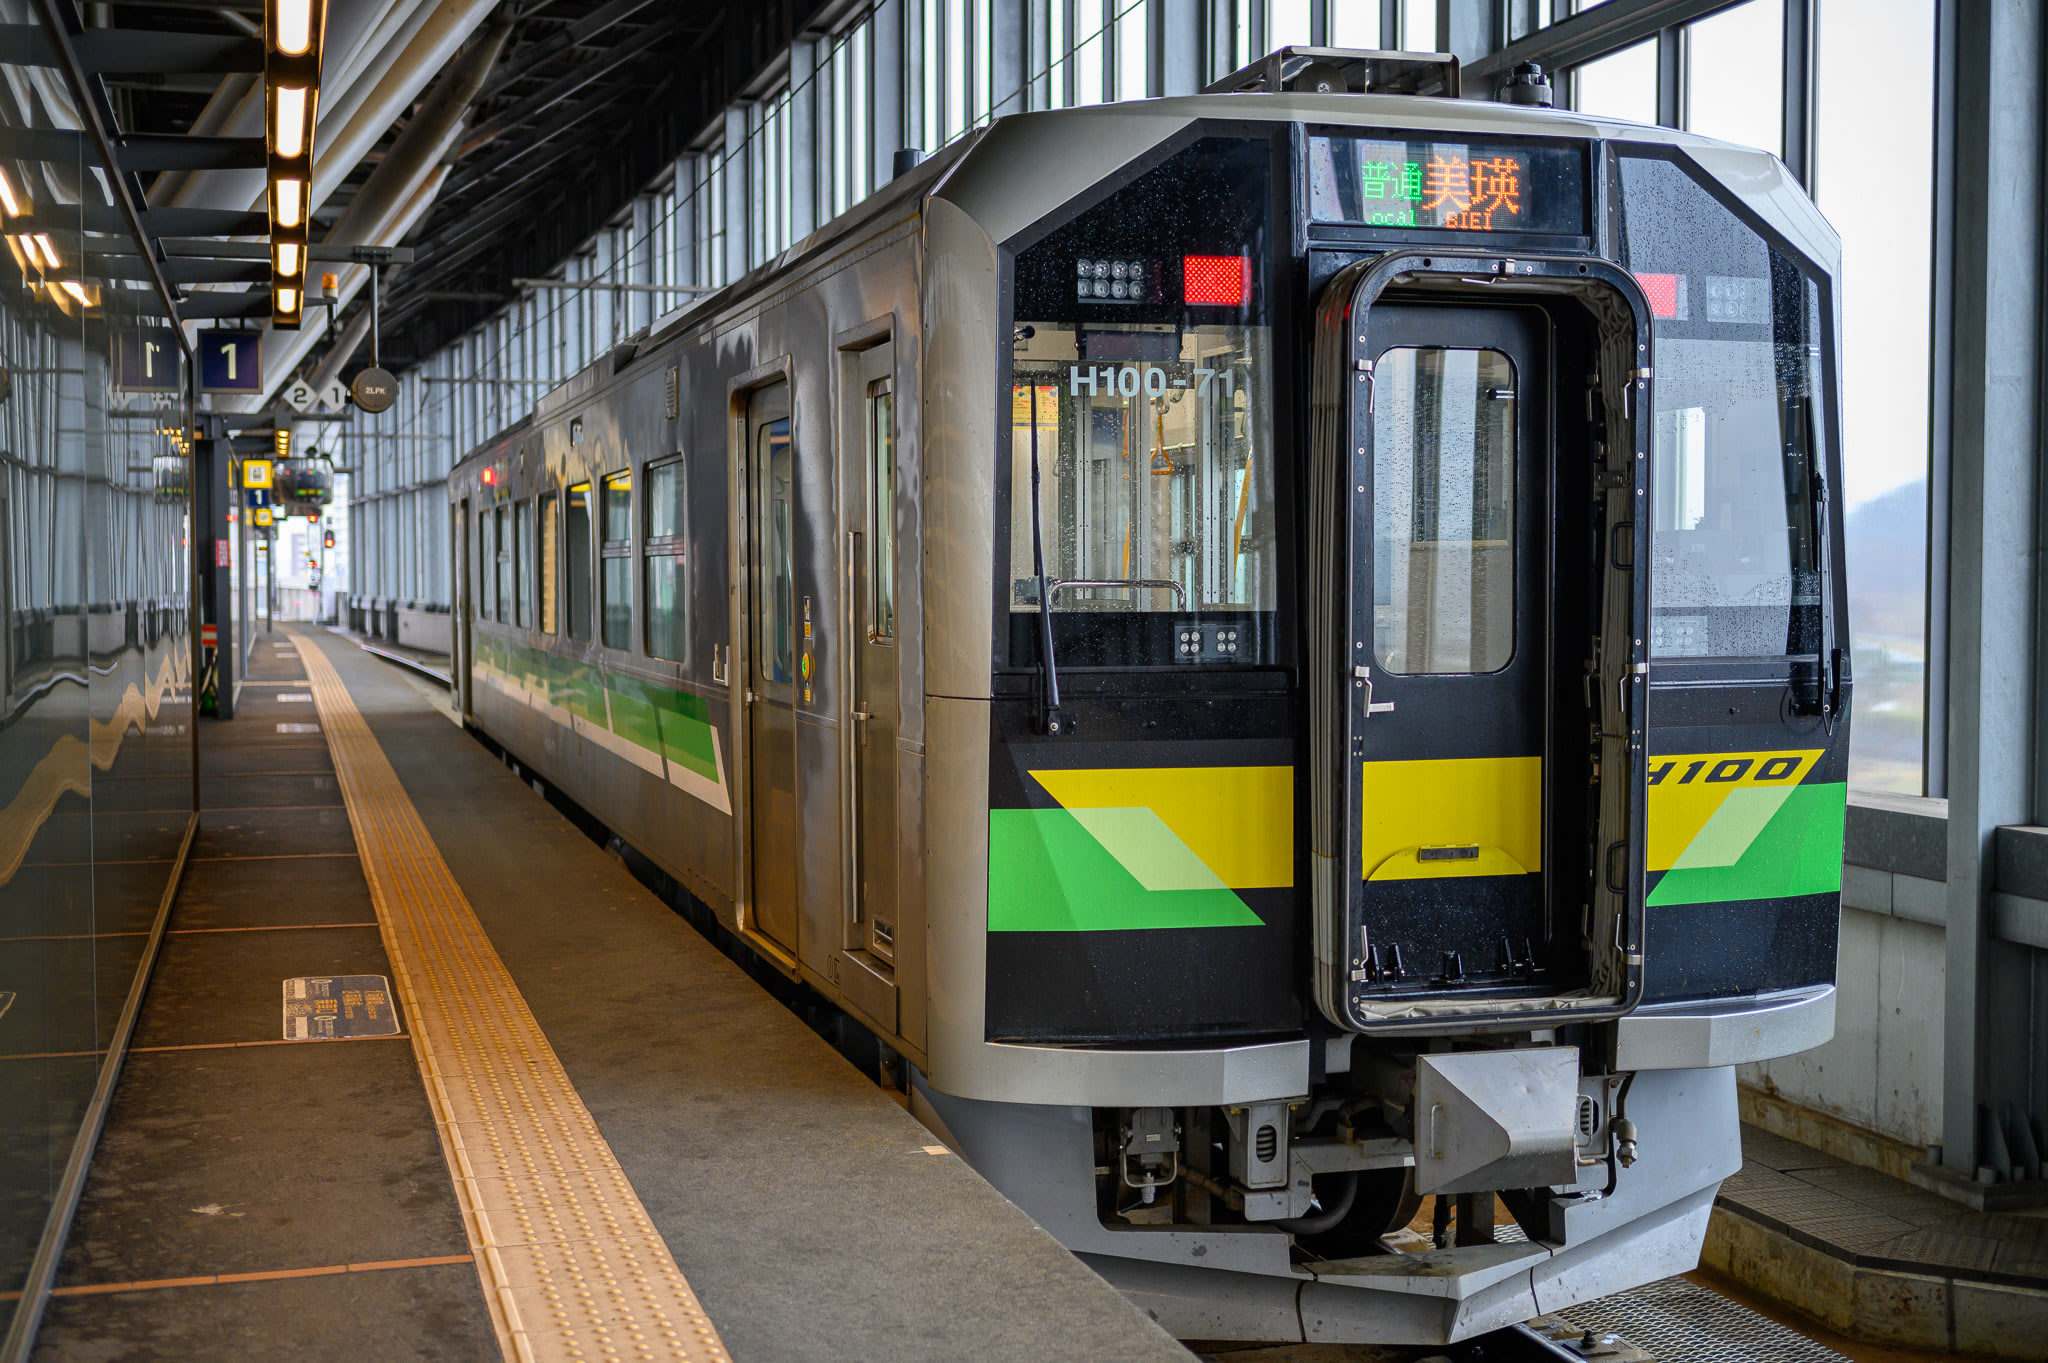 A small, one-carriage train waiting at a platform at Asahikawa Station. The ticker on the front shows it is bound for Biei station.